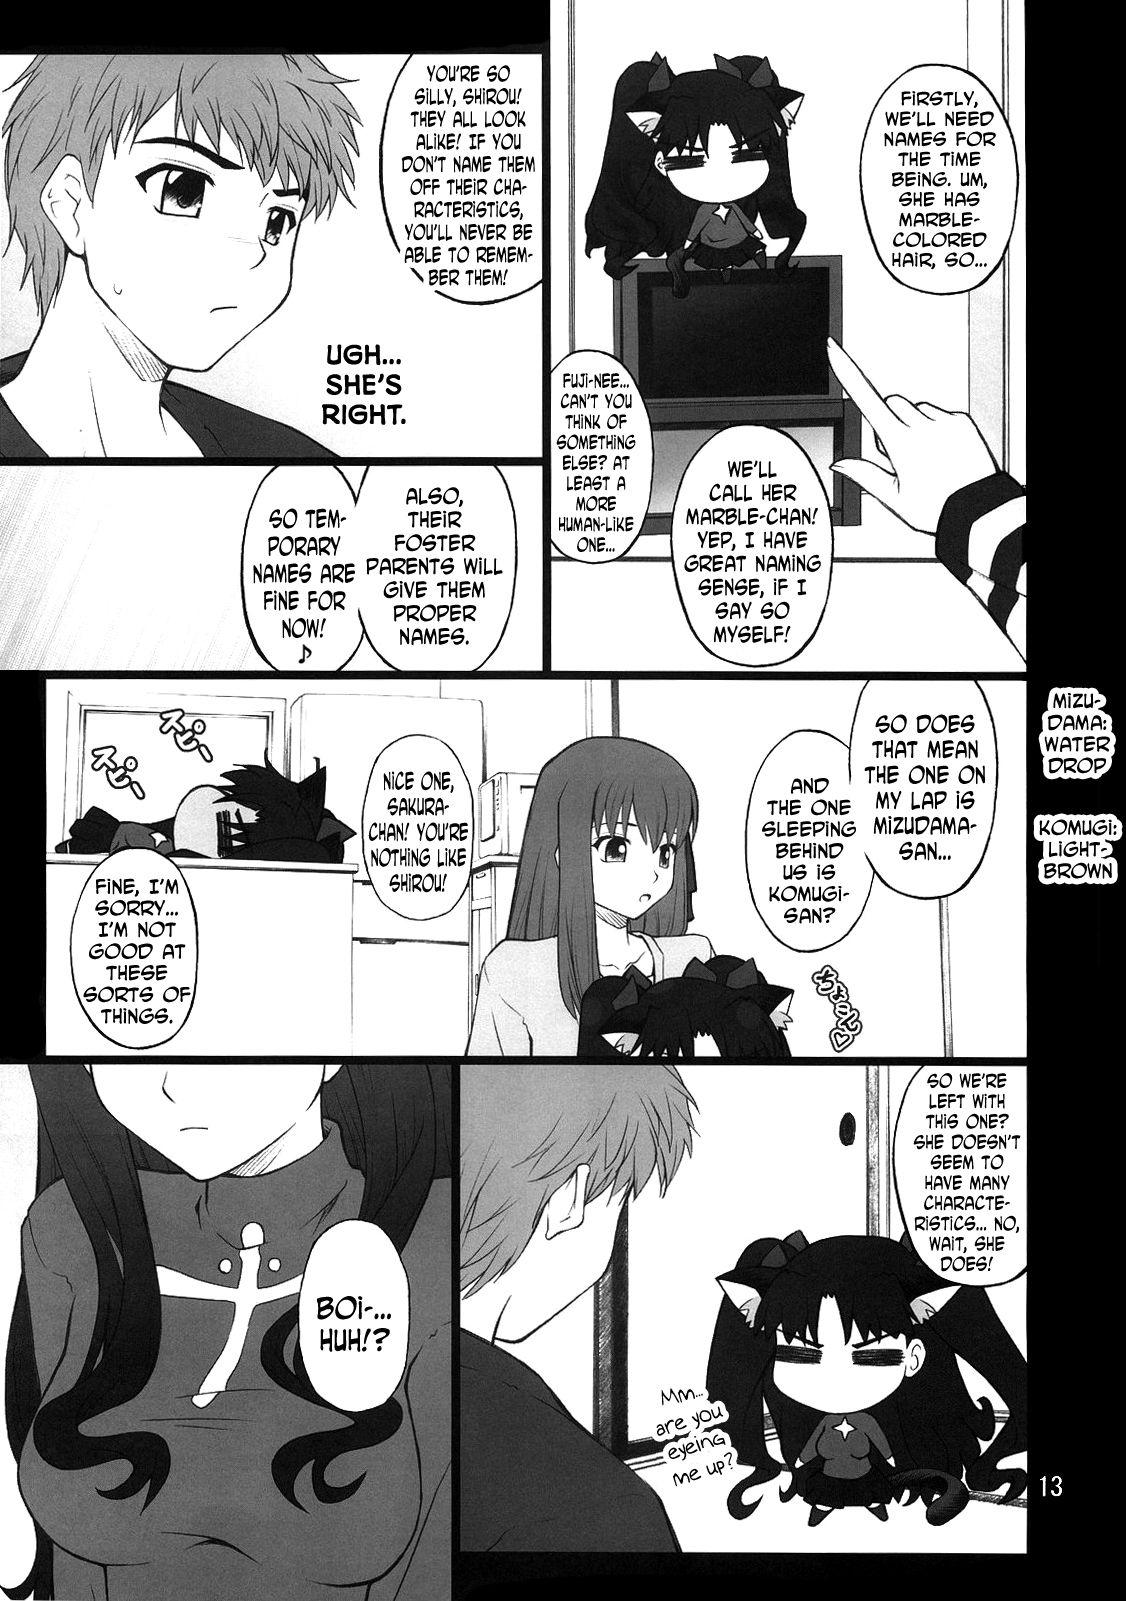 Virgin Grem-Rin 2 - Fate stay night Wetpussy - Page 12